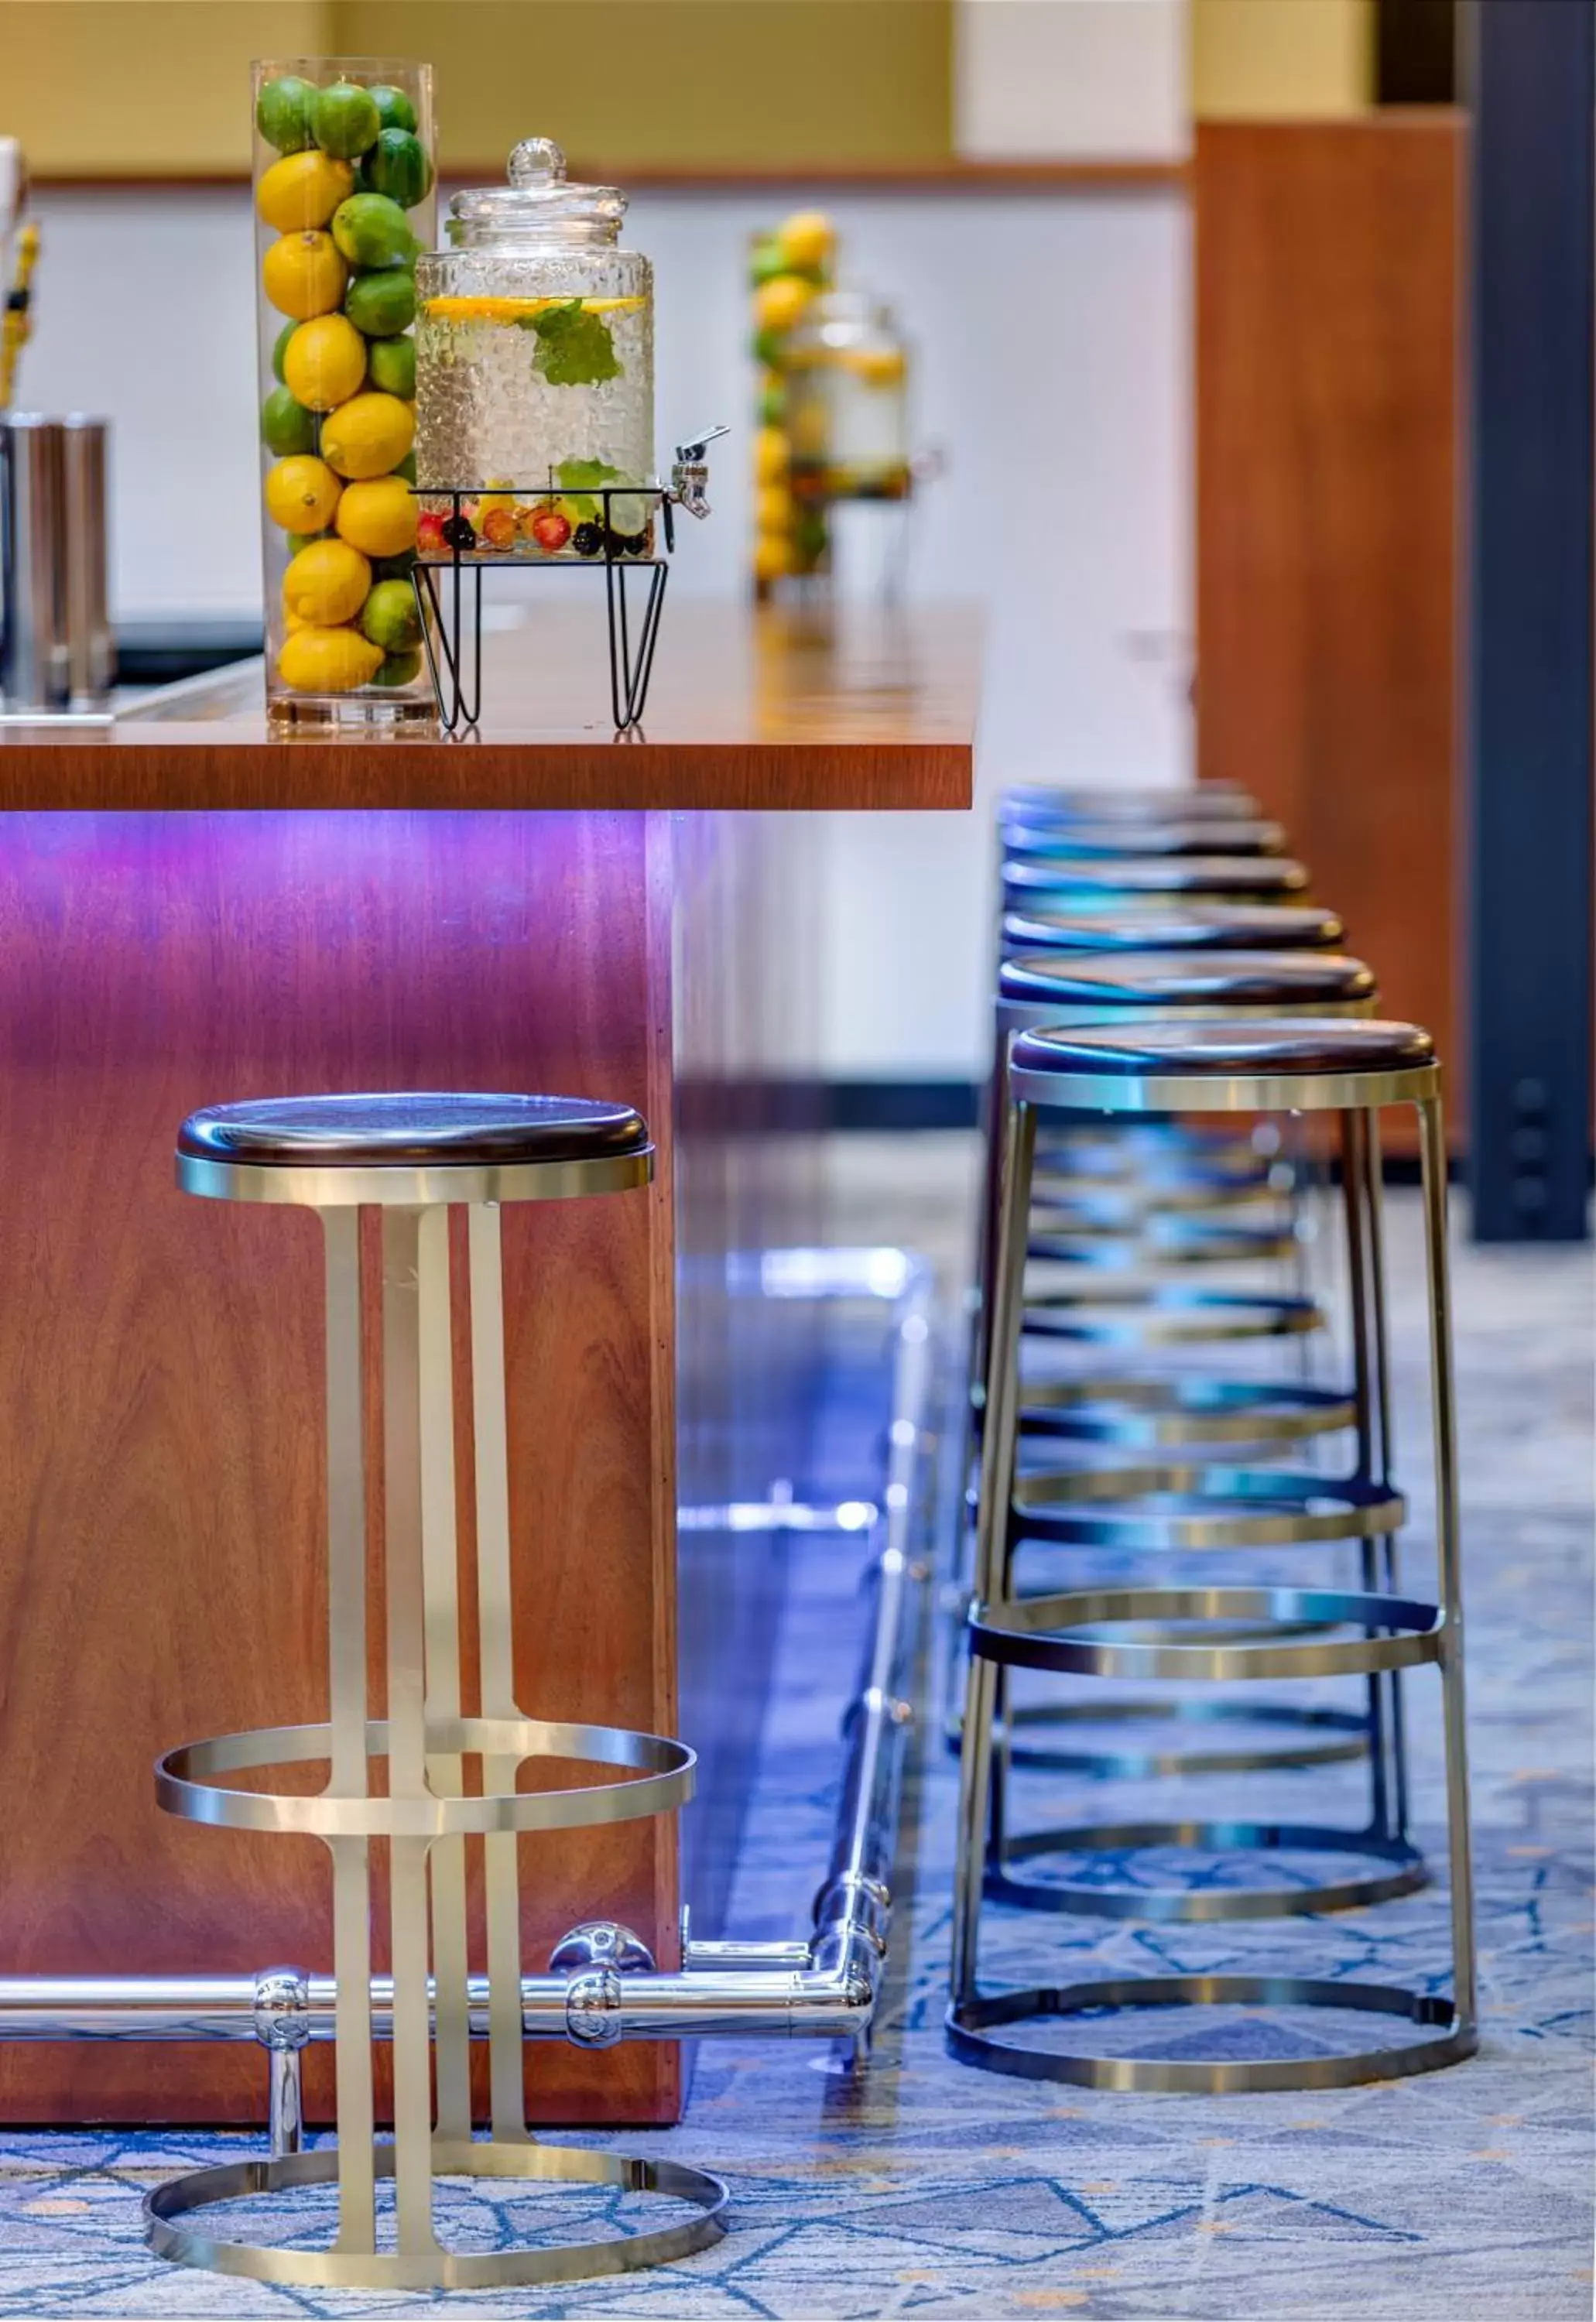 Lounge or bar in Wyndham Fort Smith City Center